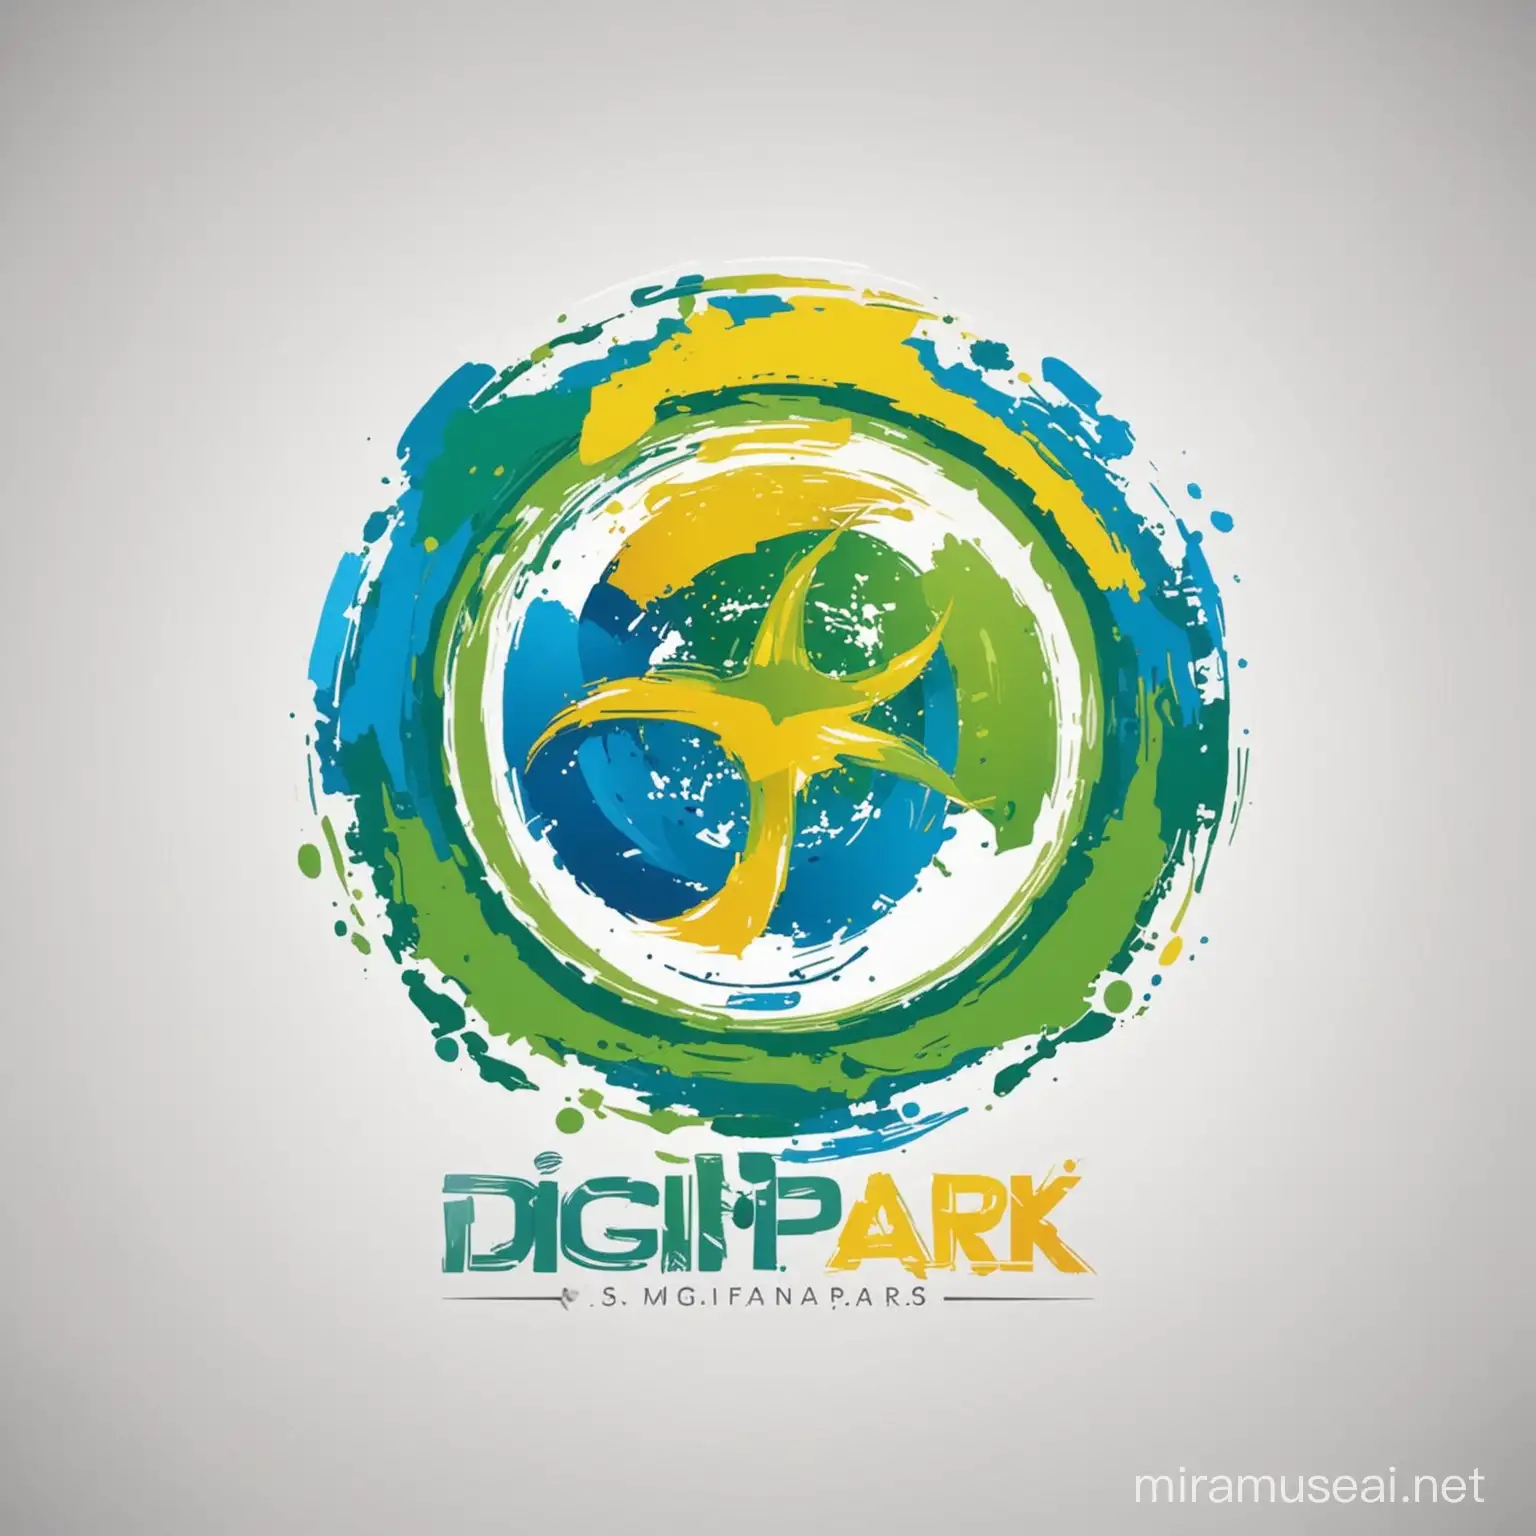 create a Ict tech logo with colour green,blue and yellow.
the brand name is DigiSpark Mfangano. include the best image